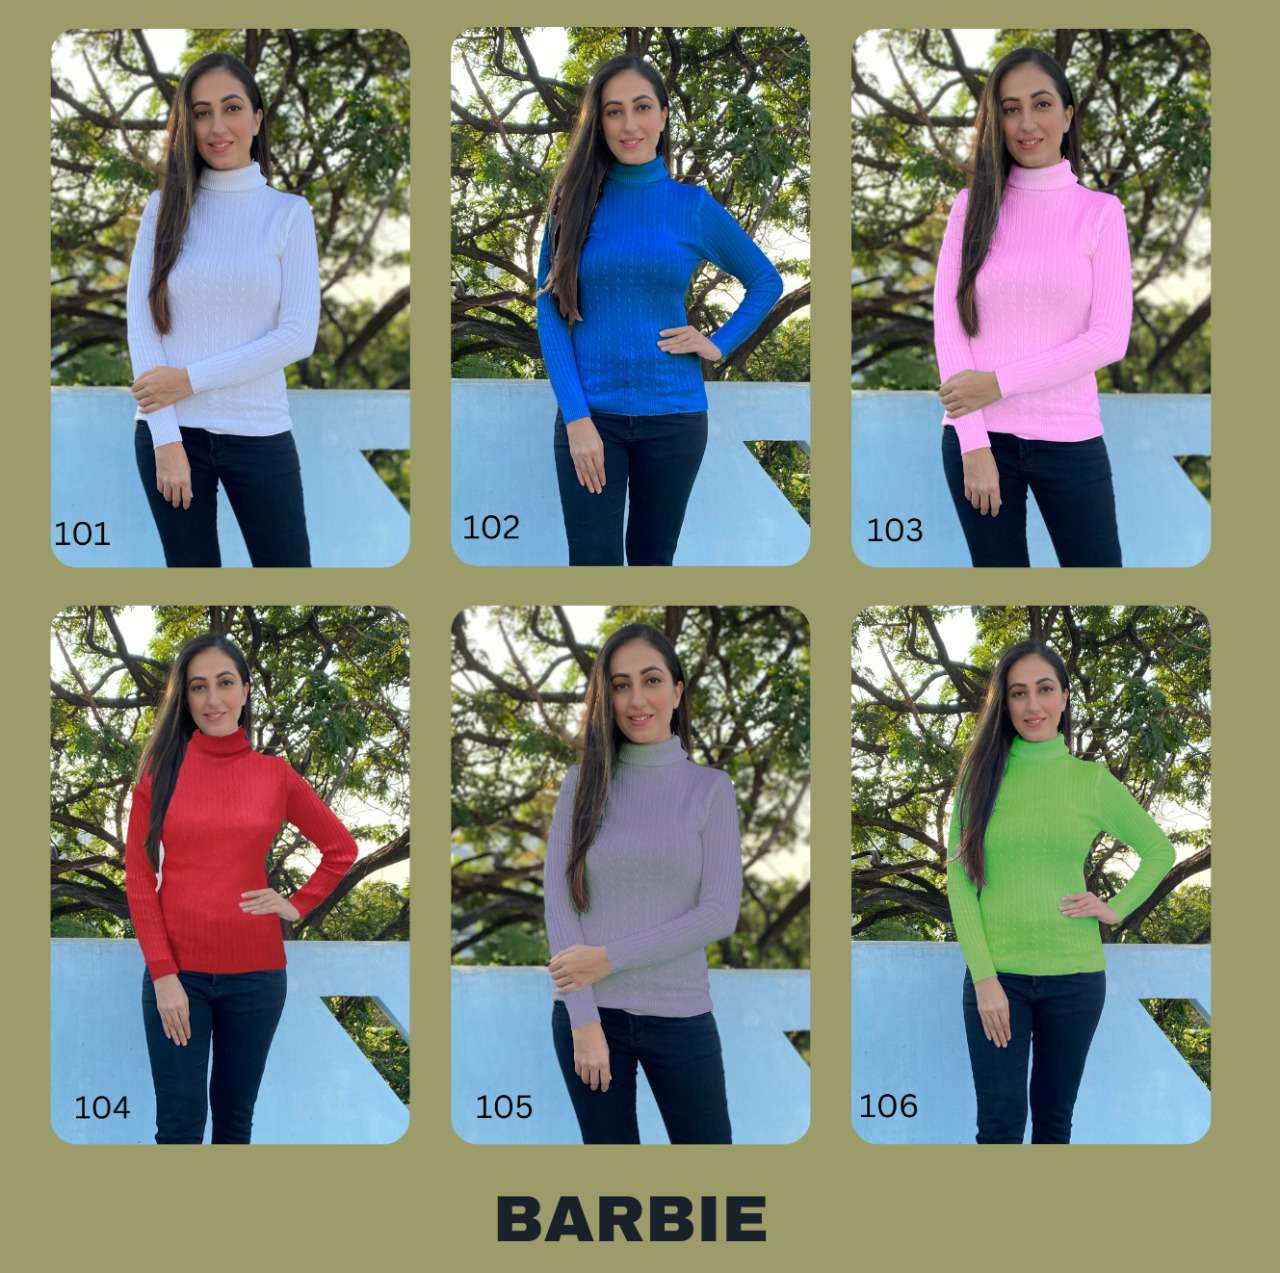 BARBIE BY FABZOO BRAND LAUNCHES NEW ARRIVALOF WOOLLEN TOP WITH PREMIUM RABBIT  WOOL - WHOLESALER AND...